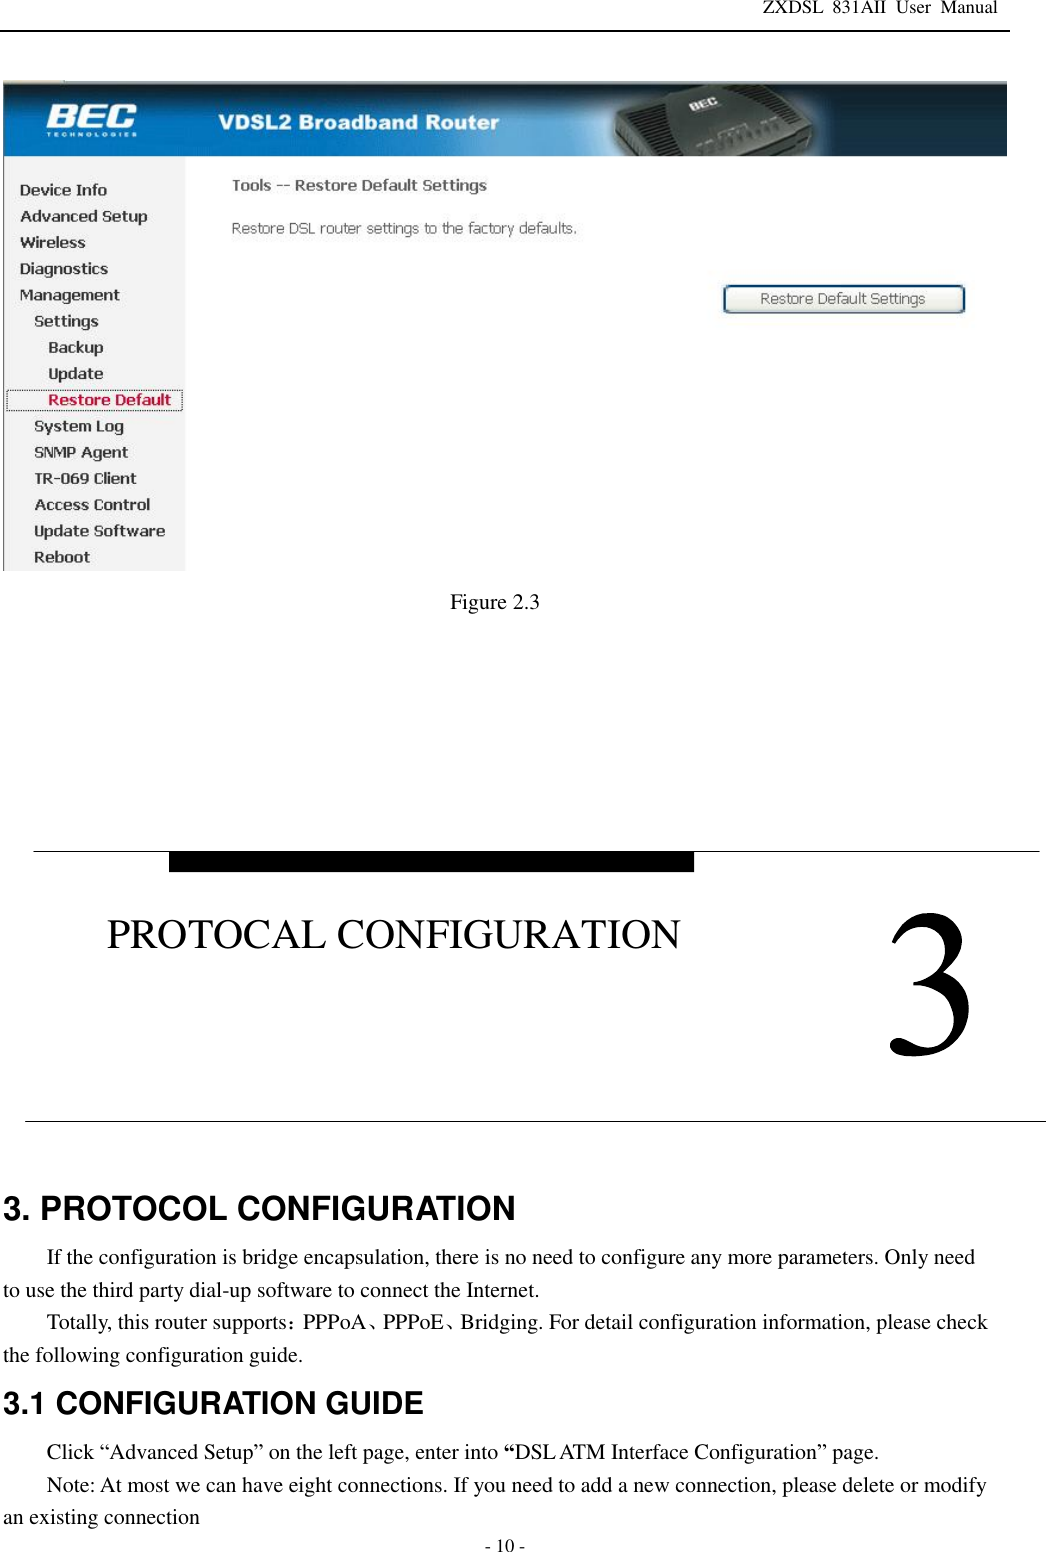 ZXDSL 831AII User Manual  - 10 - Figure 2.3        3. PROTOCOL CONFIGURATION If the configuration is bridge encapsulation, there is no need to configure any more parameters. Only need to use the third party dial-up software to connect the Internet.  Totally, this router supports：PPPoA、PPPoE、Bridging. For detail configuration information, please check the following configuration guide. 3.1 CONFIGURATION GUIDE Click “Advanced Setup” on the left page, enter into “DSL ATM Interface Configuration” page. Note: At most we can have eight connections. If you need to add a new connection, please delete or modify an existing connection   PROTOCAL CONFIGURATION 